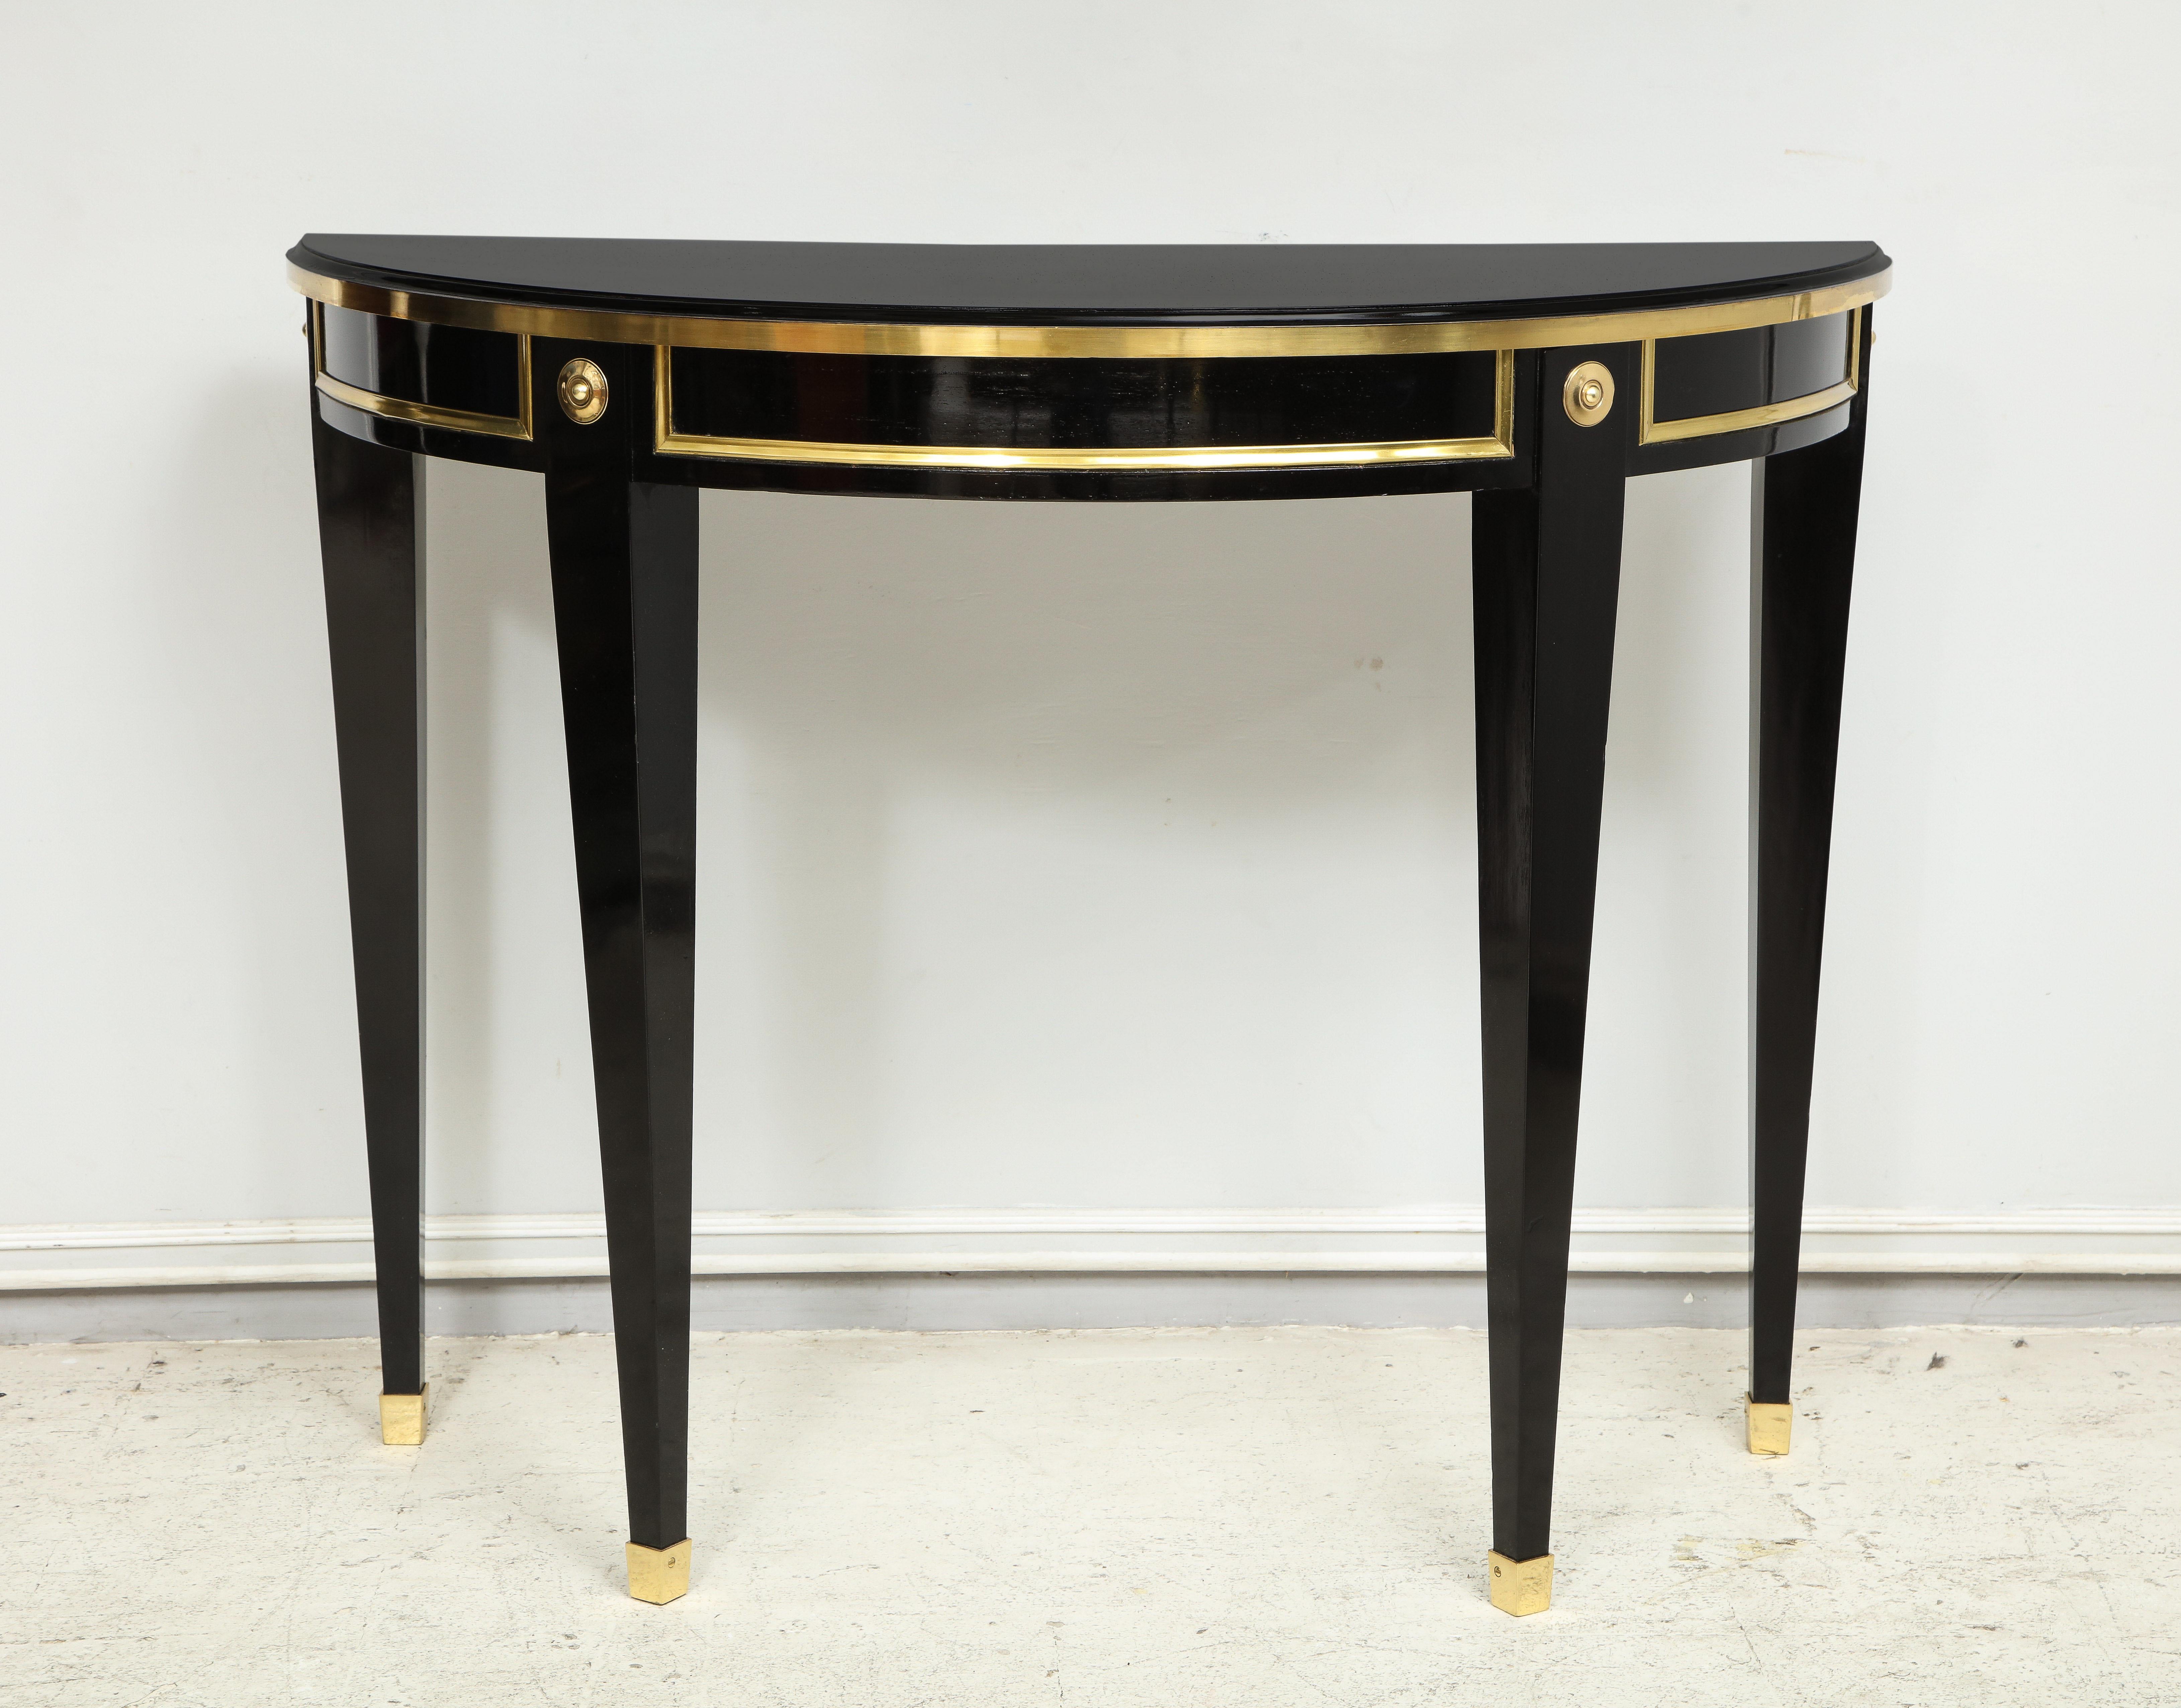 Bespoke pair of ebonized consoles in the neoclassic style with brass banding.
Set fo 2. Please note that these items can be fully customizable with a lead time of 8-10 weeks.